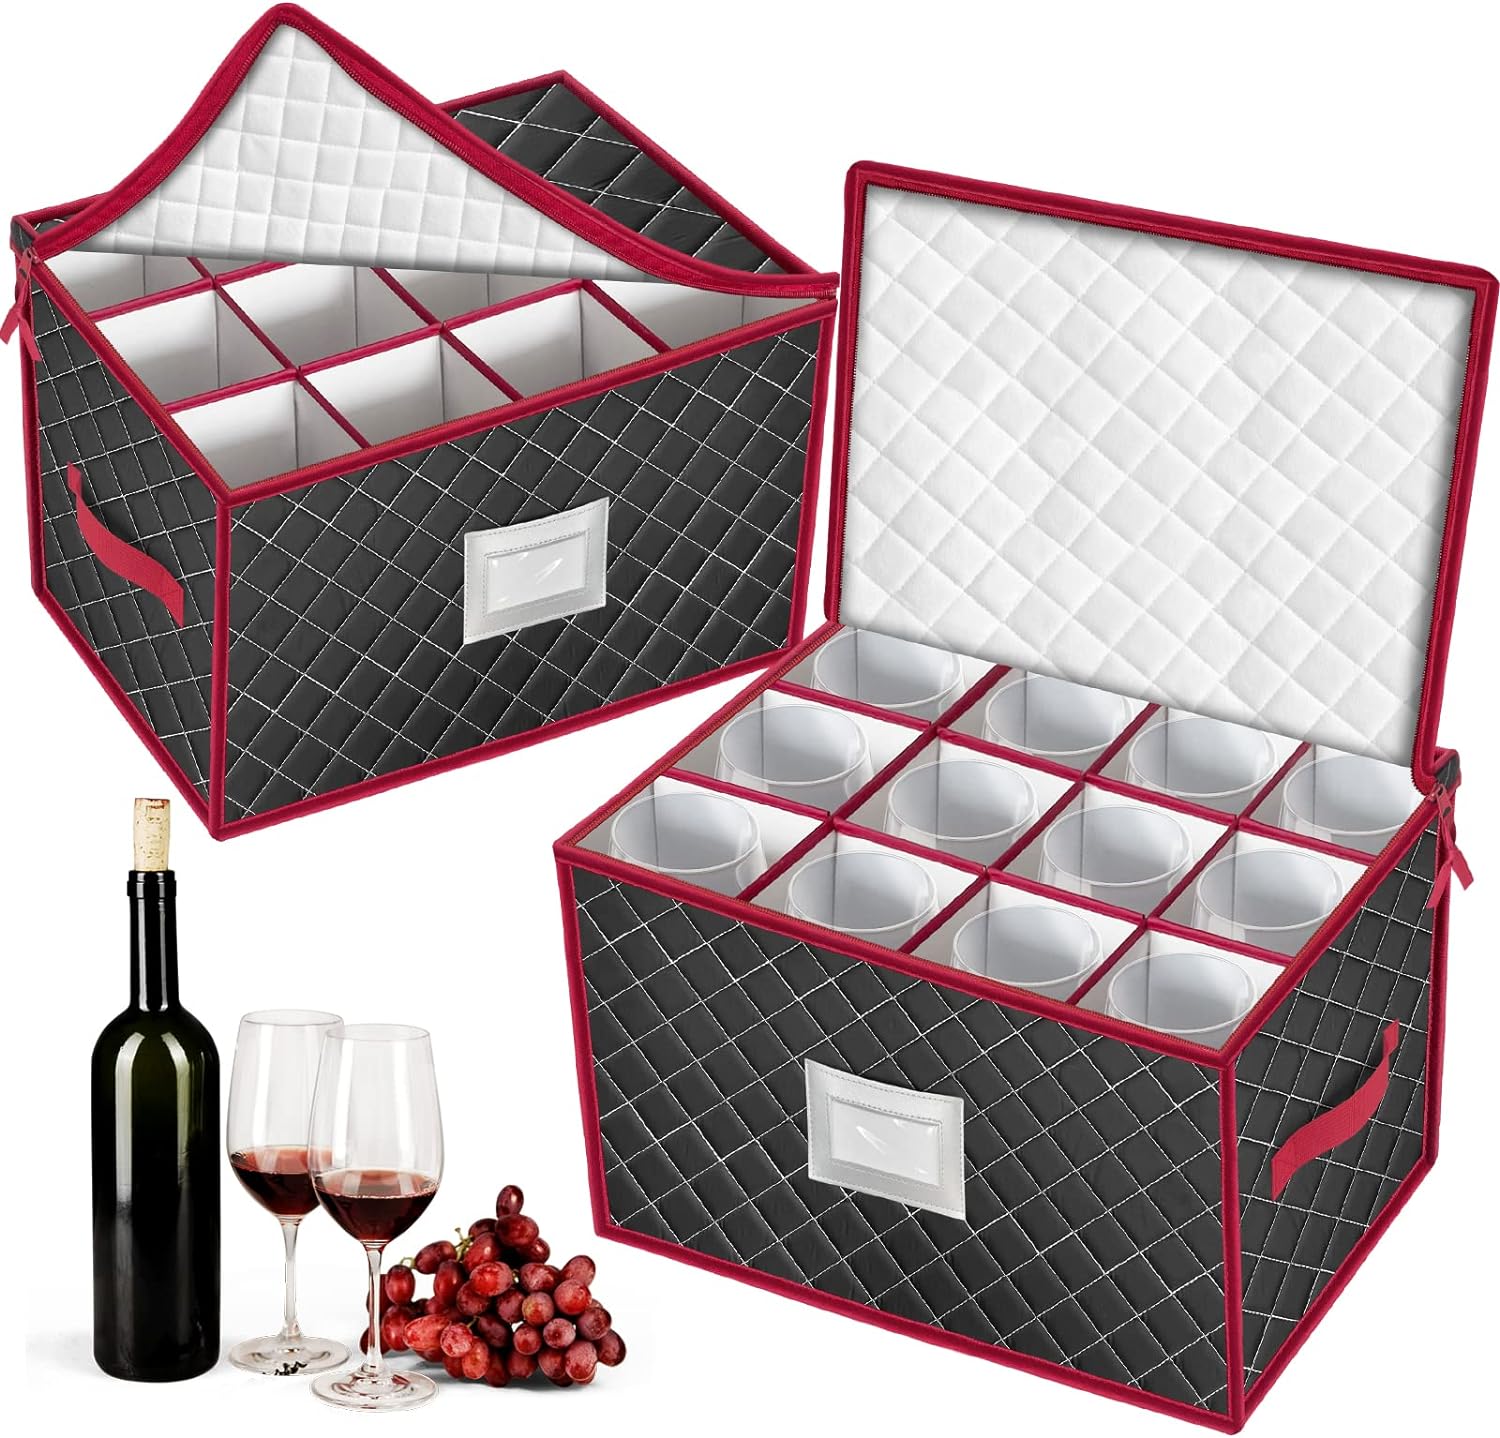 VERONLY Christmas Stemware Storage Cases with Dividers- Holds 24 Wine Glass Storage or Crystal Glassware Containers, China Storage Containers with 2 Handles and Lable Window -Set of 2 Black